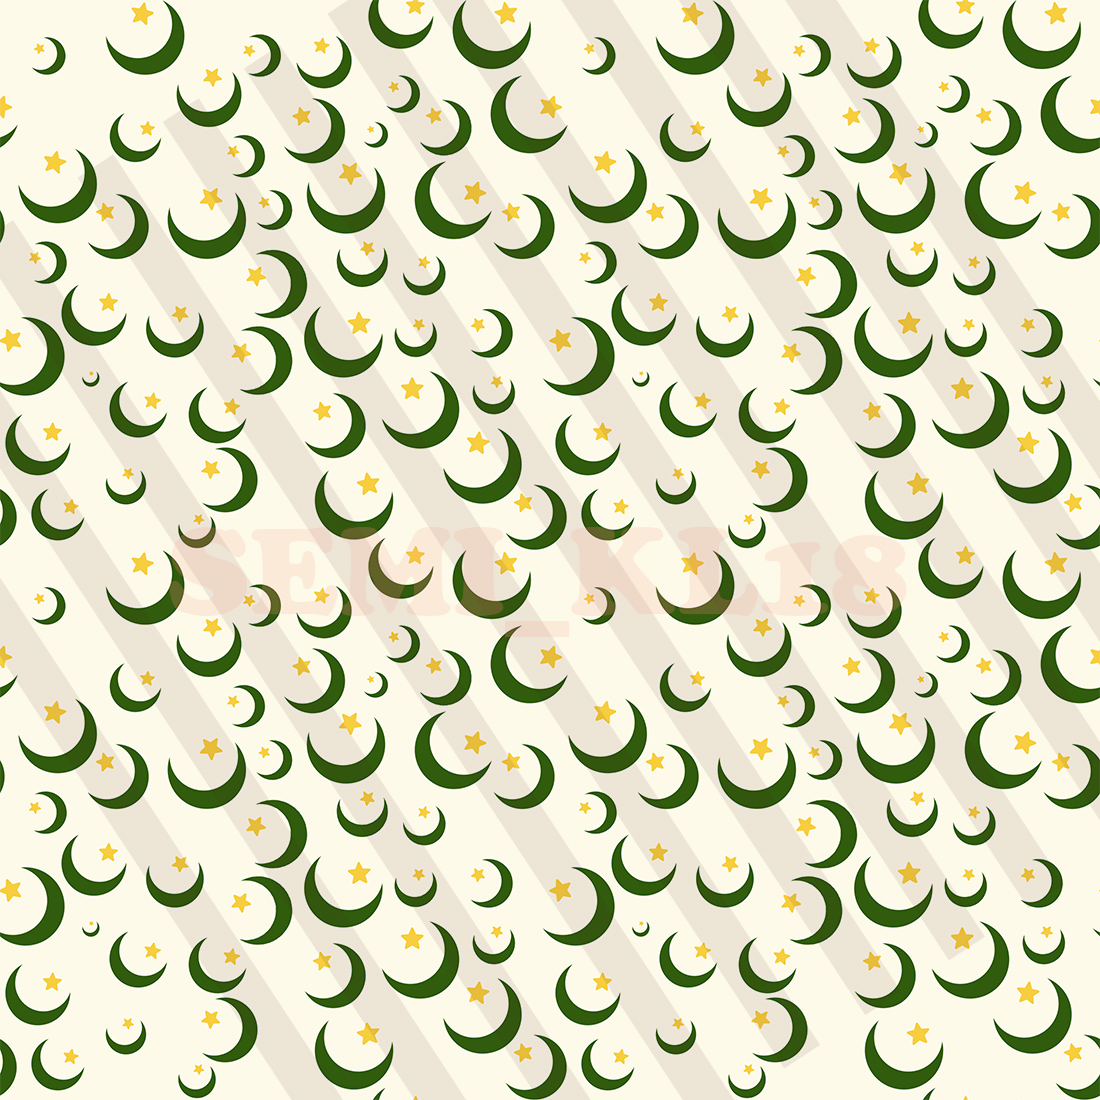 Green and white pattern with stars and crescents.